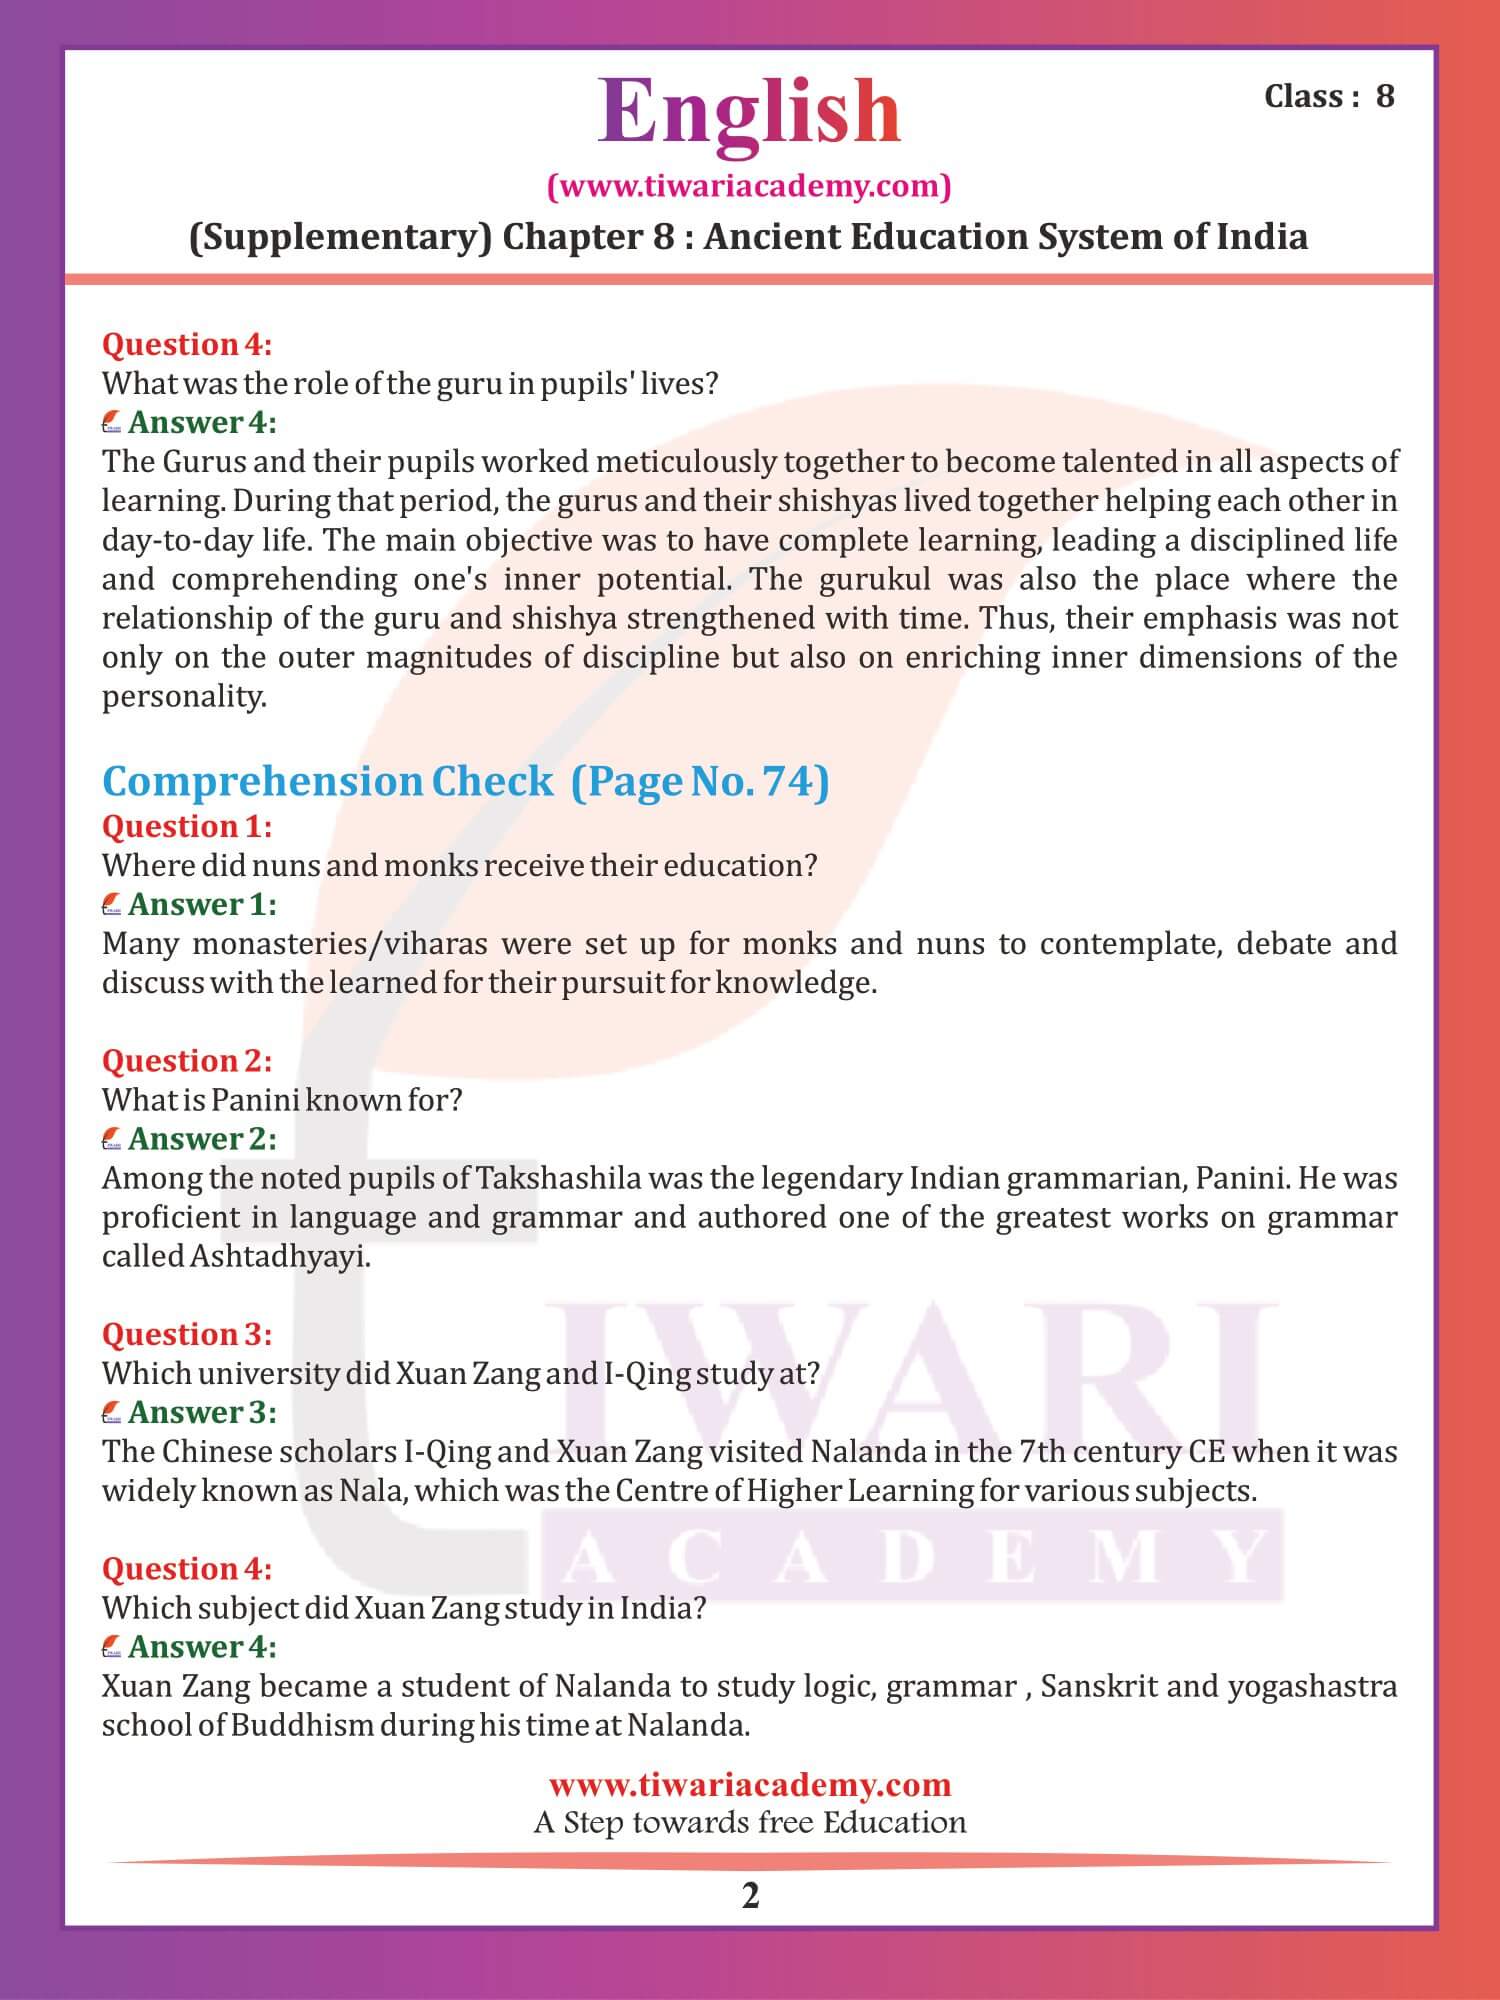 Class 8 English Supplementary Chapter 8 Ancient Education System of India